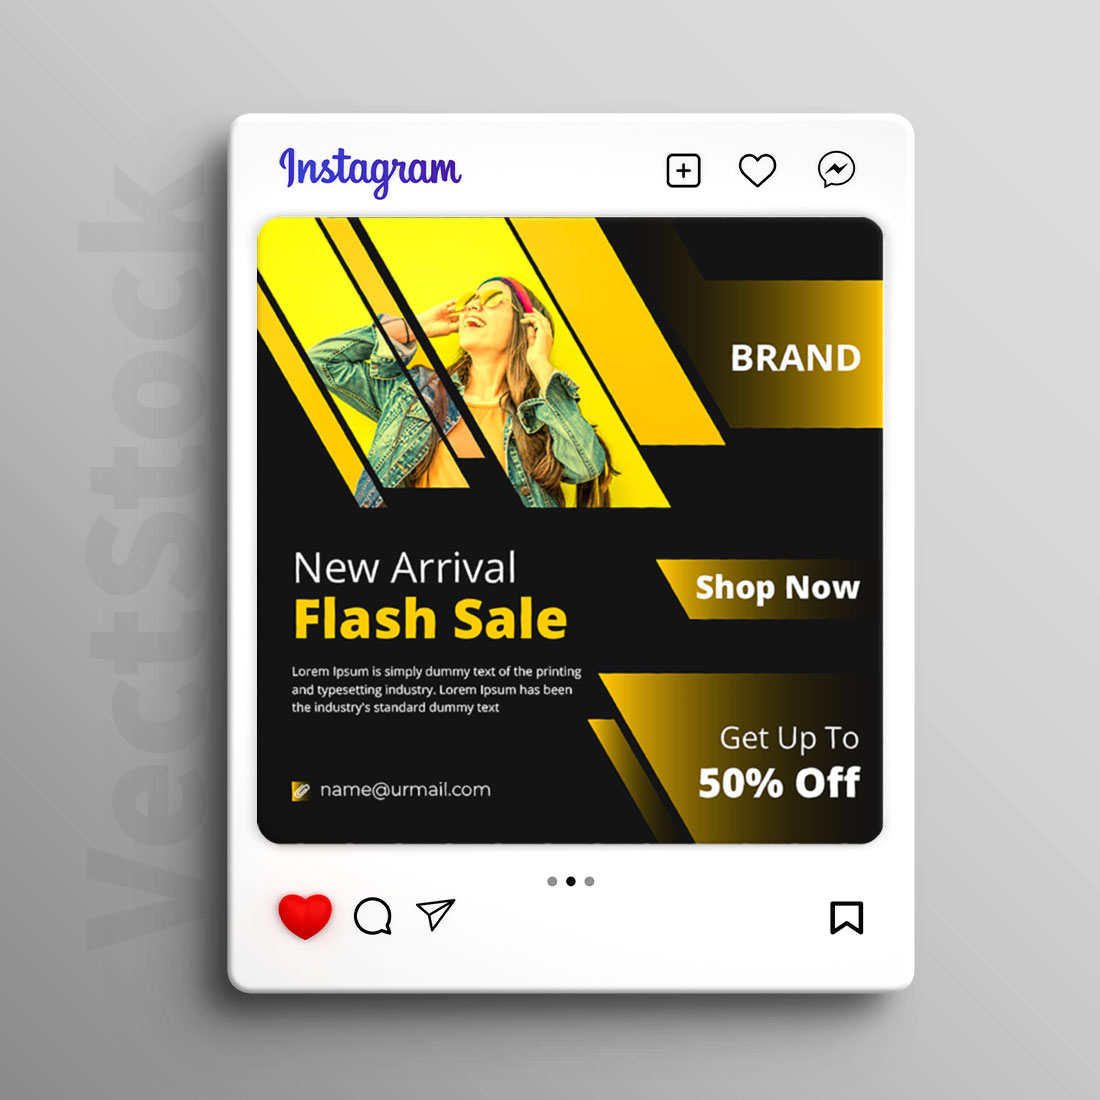 New arrival flash sale social media Instagram post and banner template design cover image.